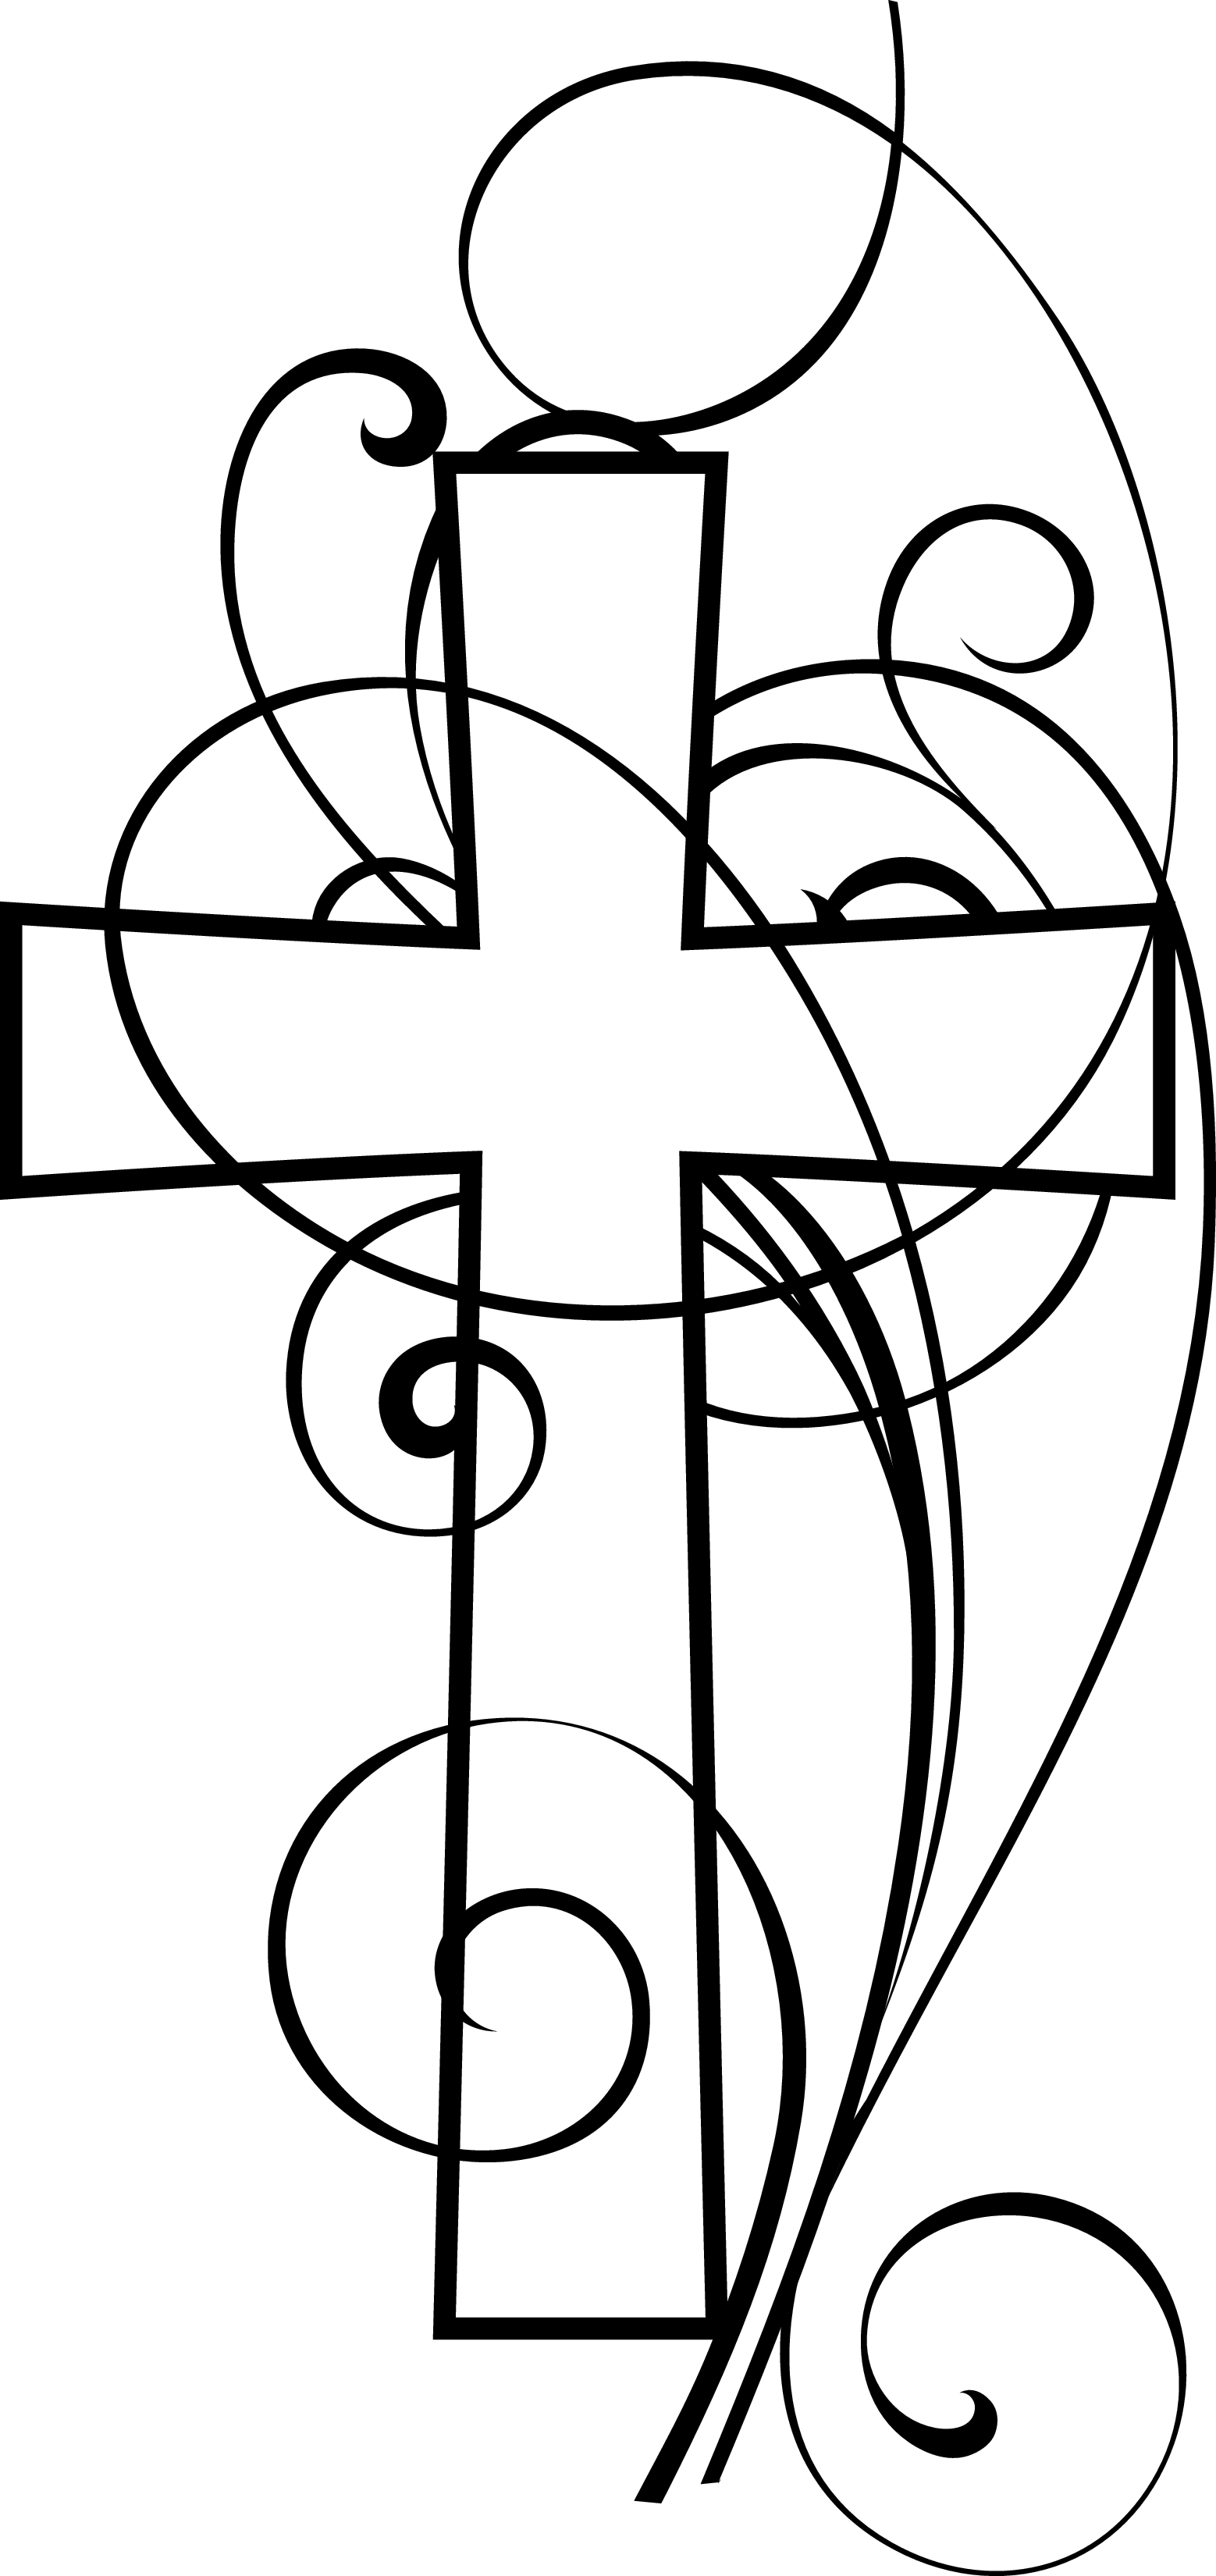 Religious religion clipart free downloads free clipart images 2